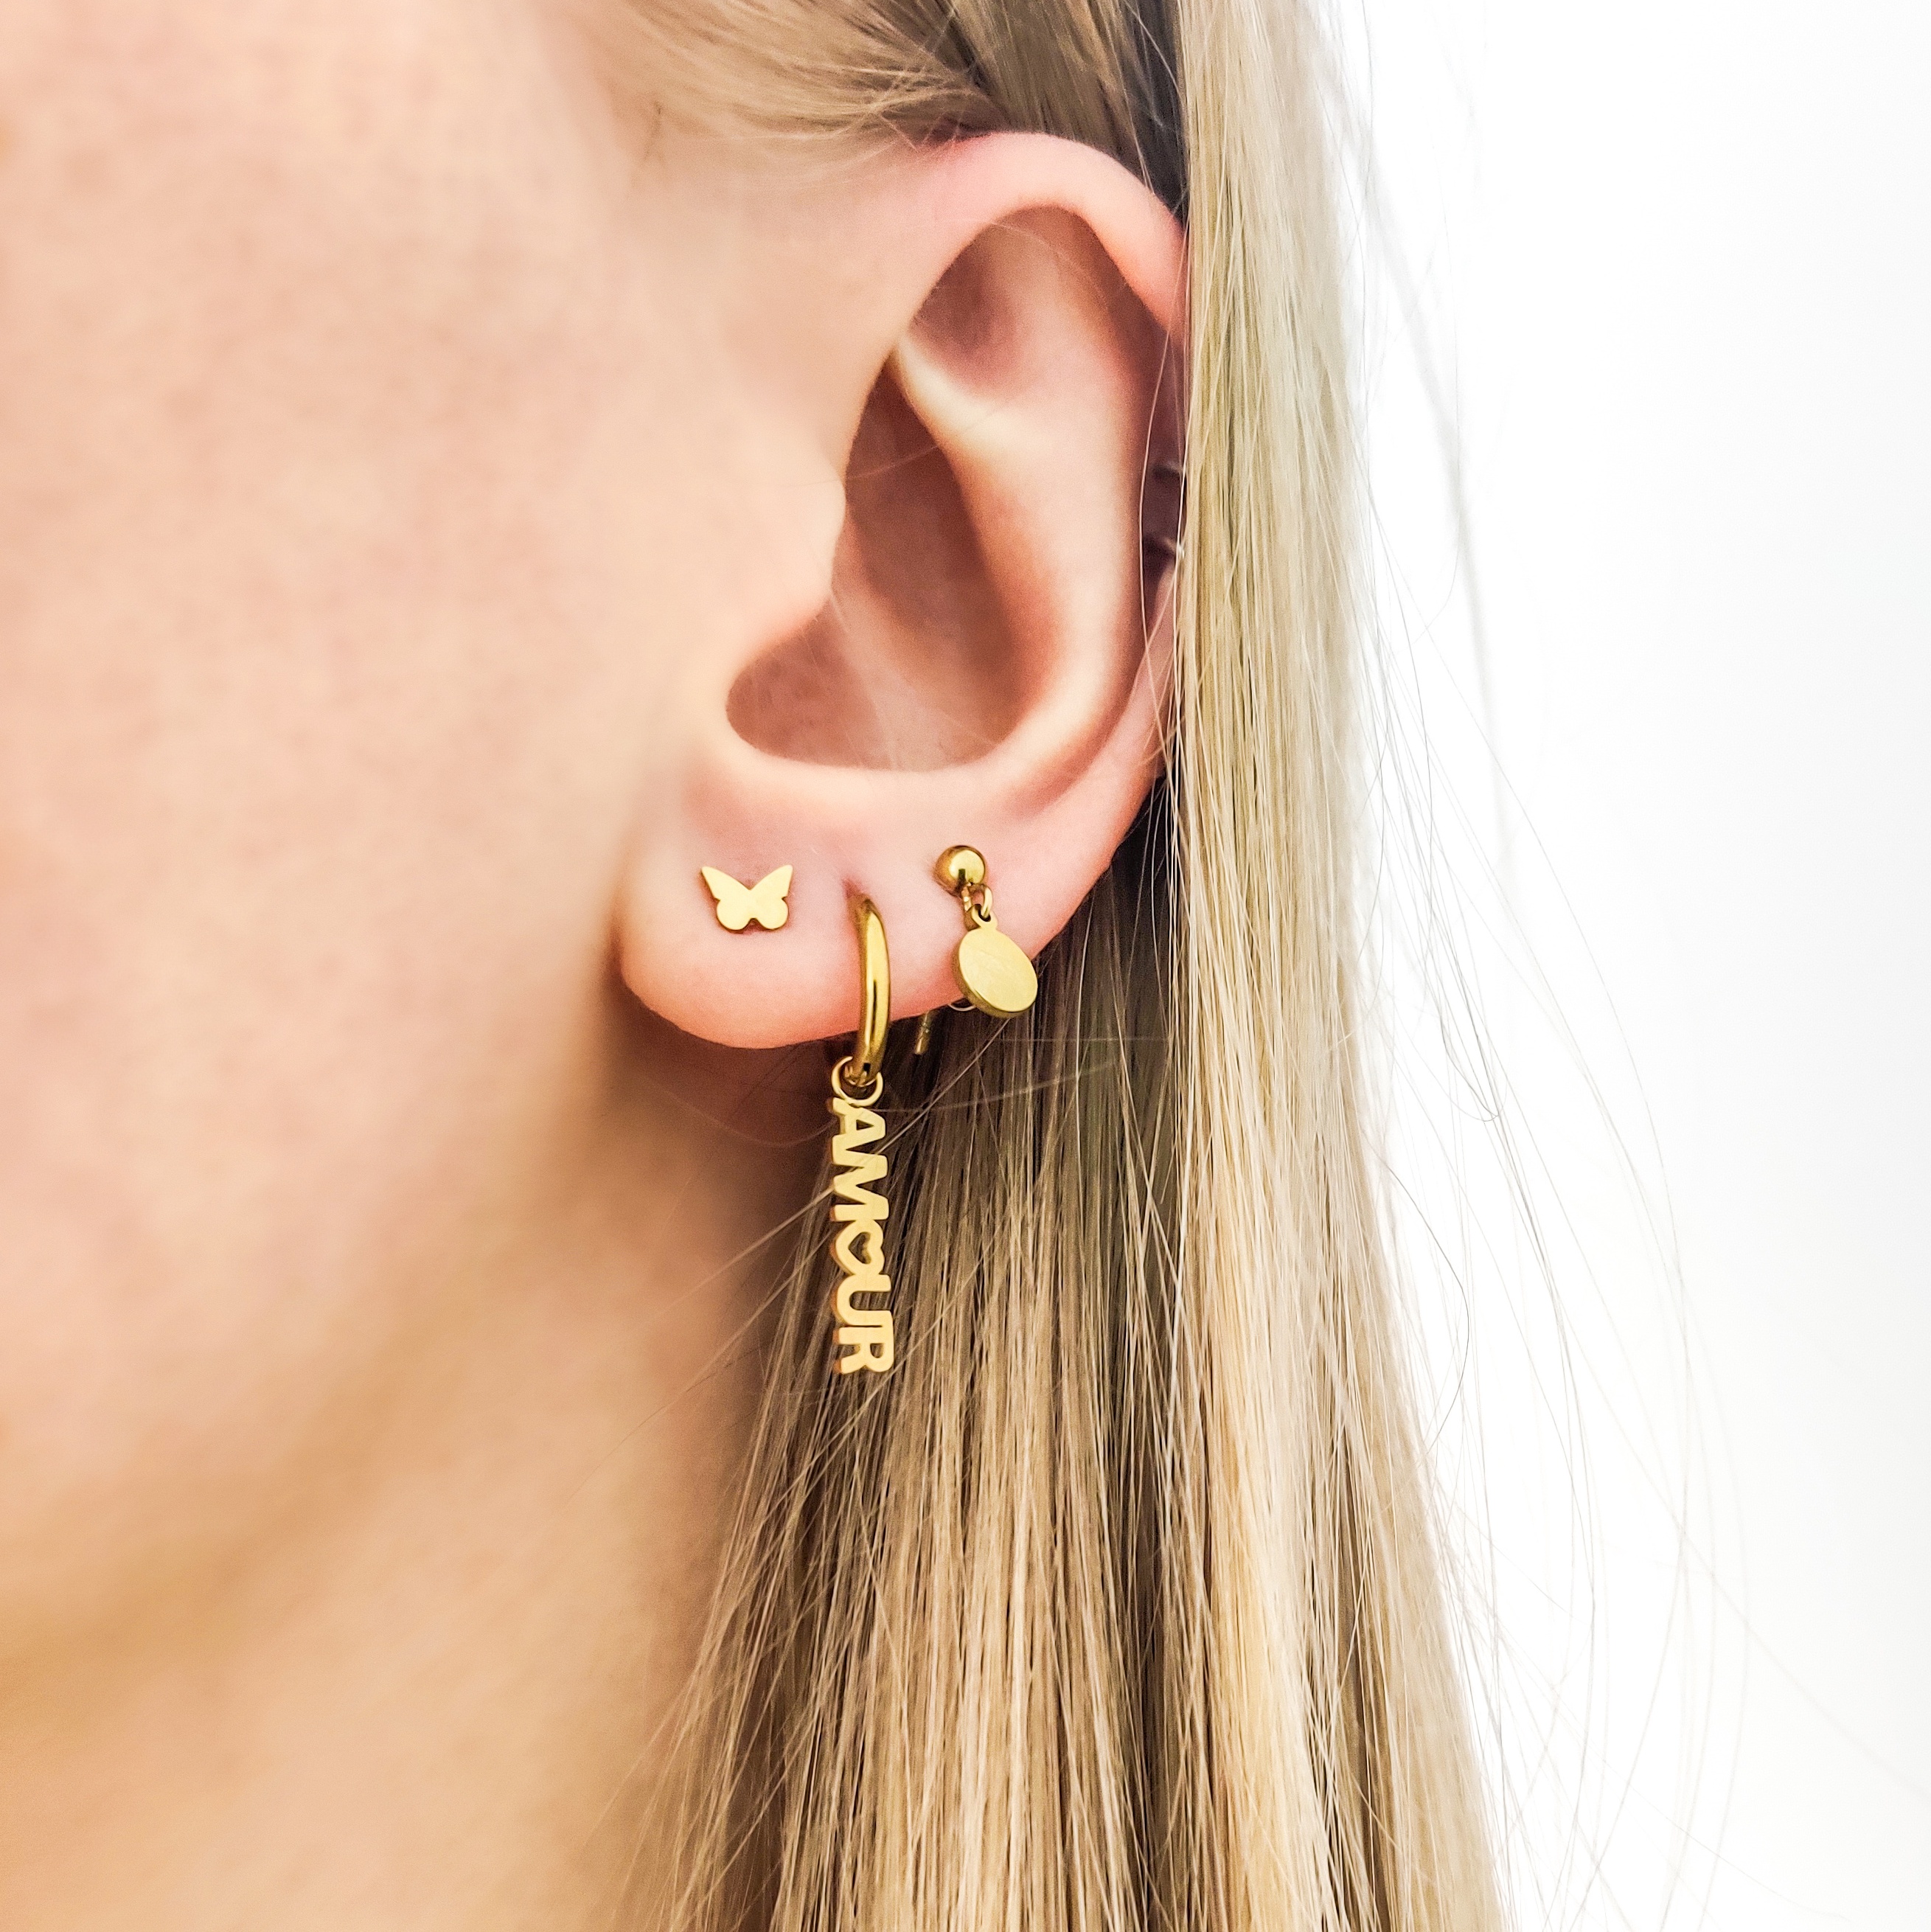 Stud earrings with charm coin